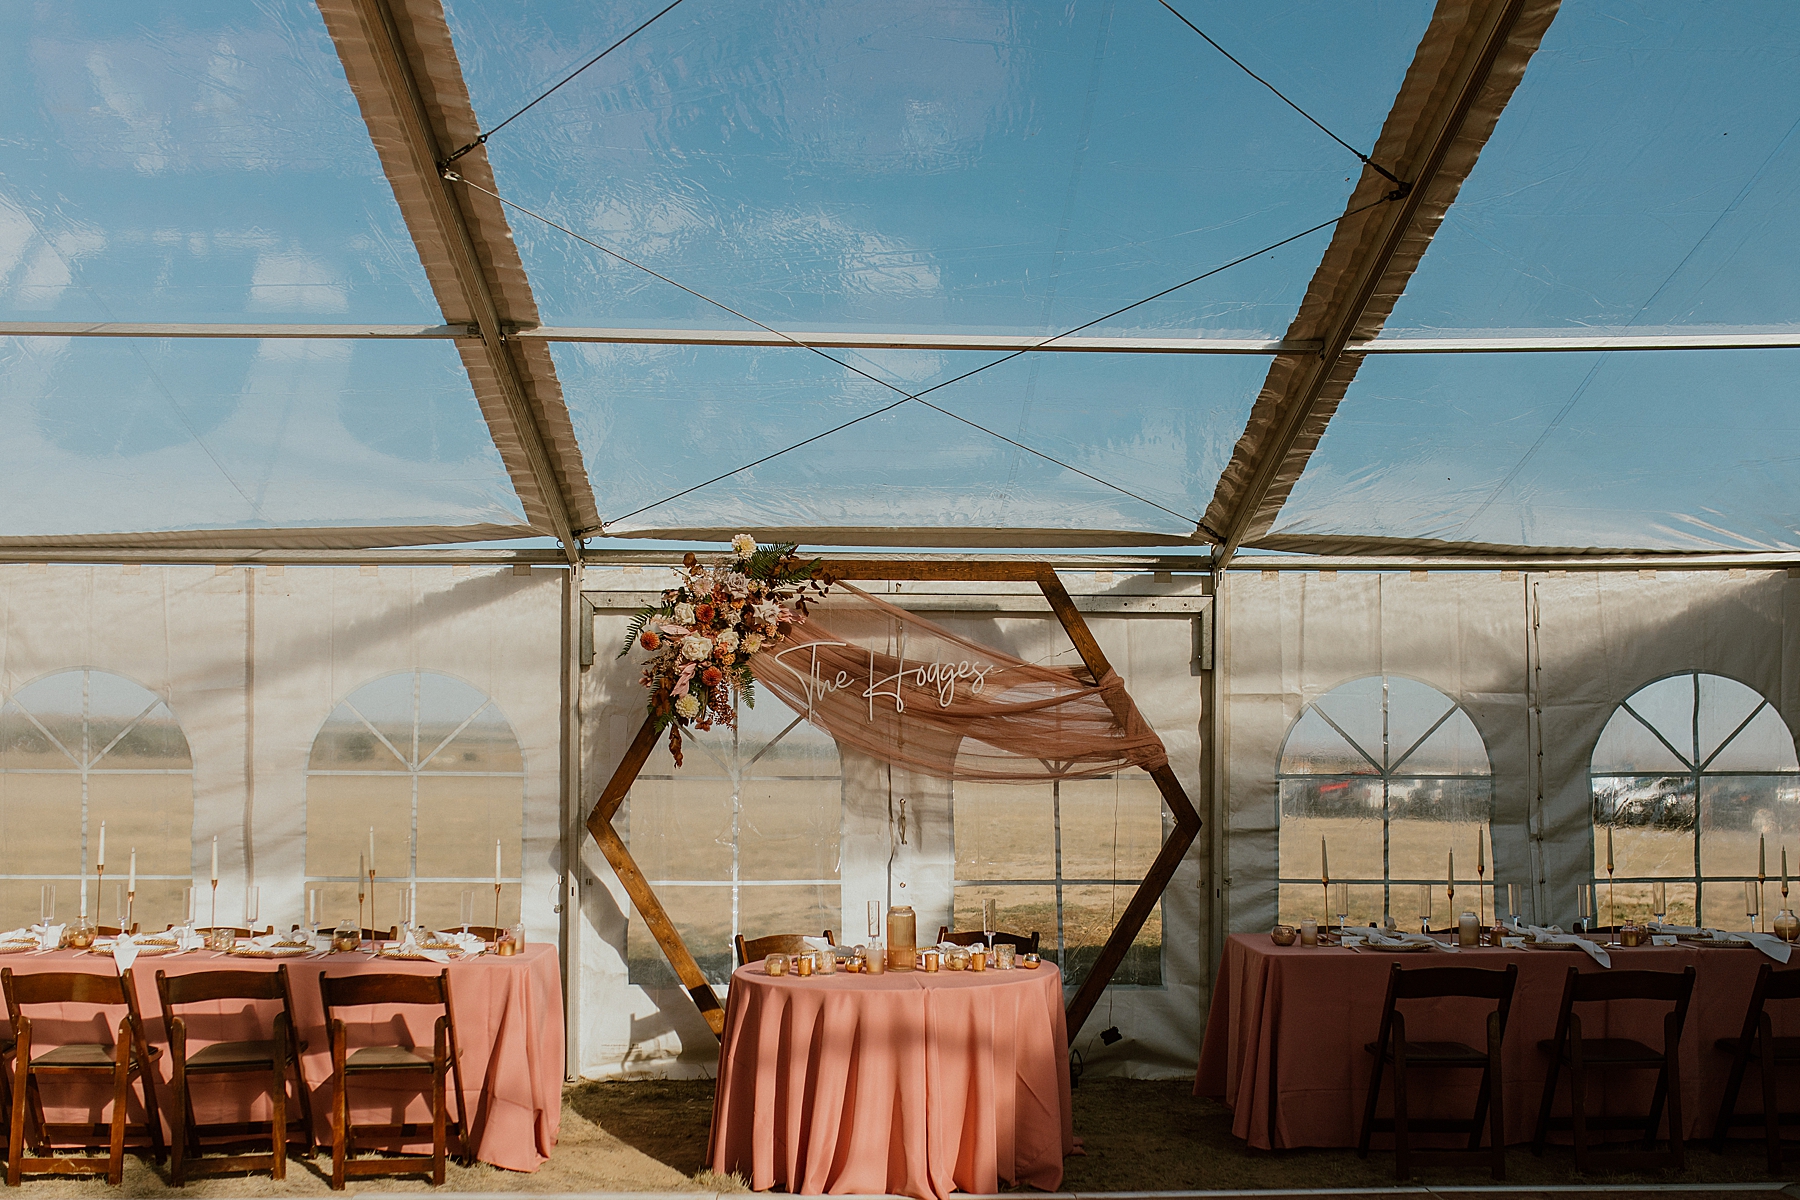 personalize your wedding location even if it's in the middle of a field like this one